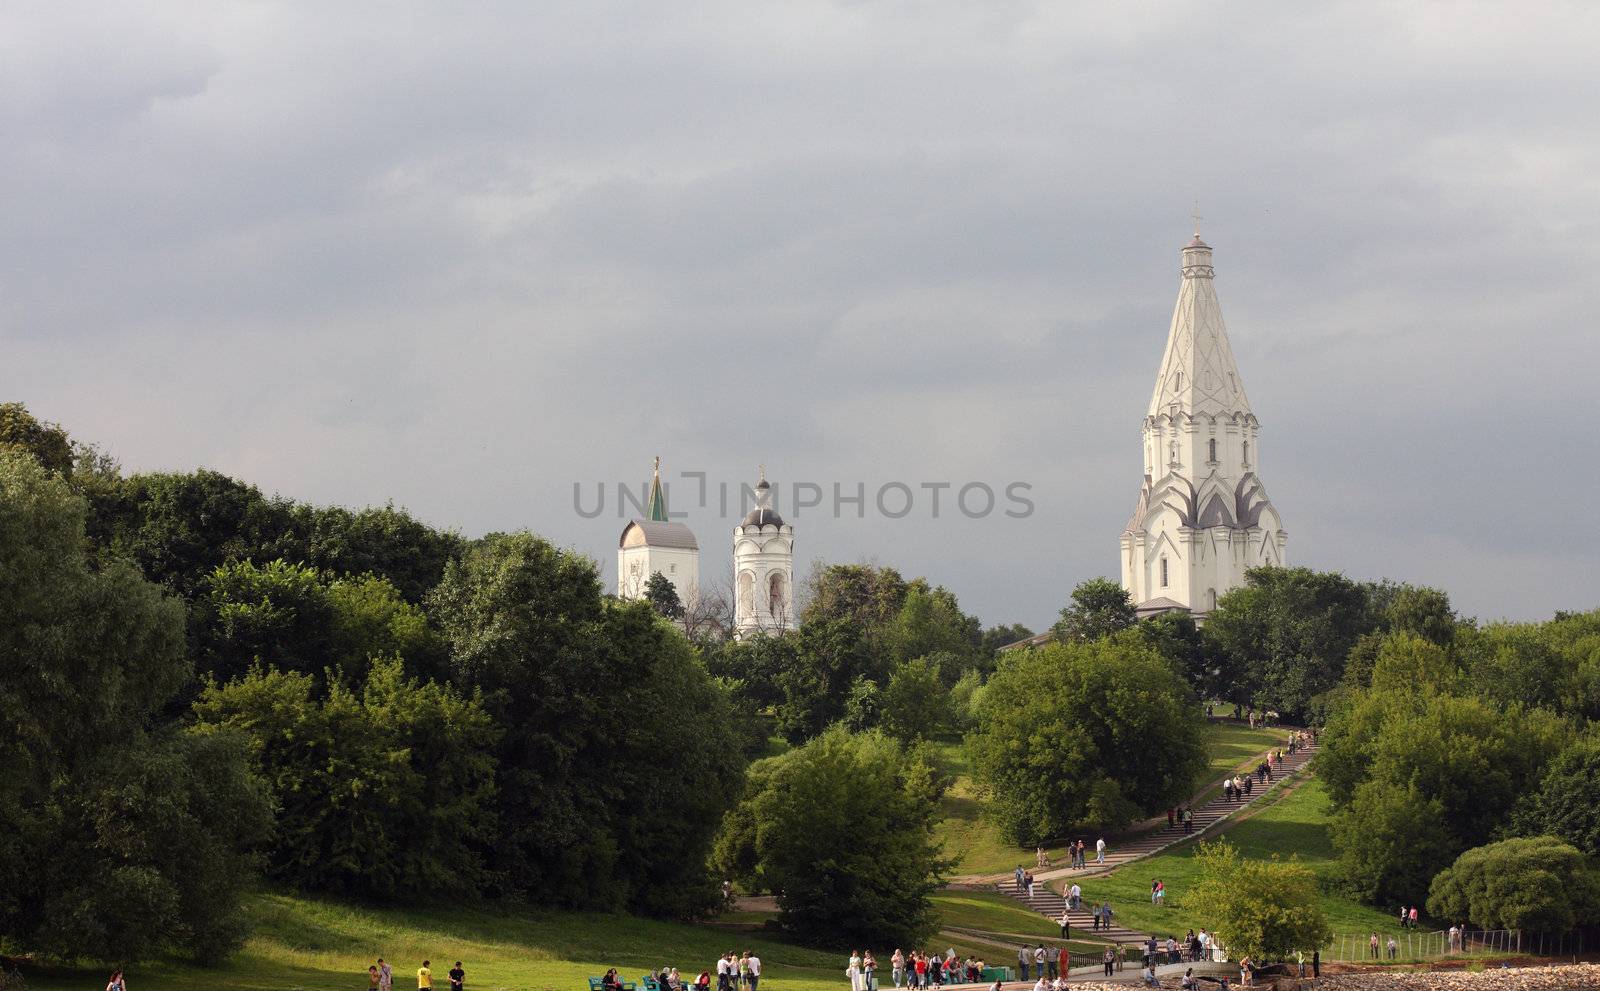 architecture, blue, building, cathedral, chapel, christ, christian, christianity, church, cross, culture, dome, exterior, famous, god, hill, history, landmark, men, national, old, orthodox, place, religion, russian, sky, spire, spirituality, structure, sun, symbol, tower, vertical, white, worship